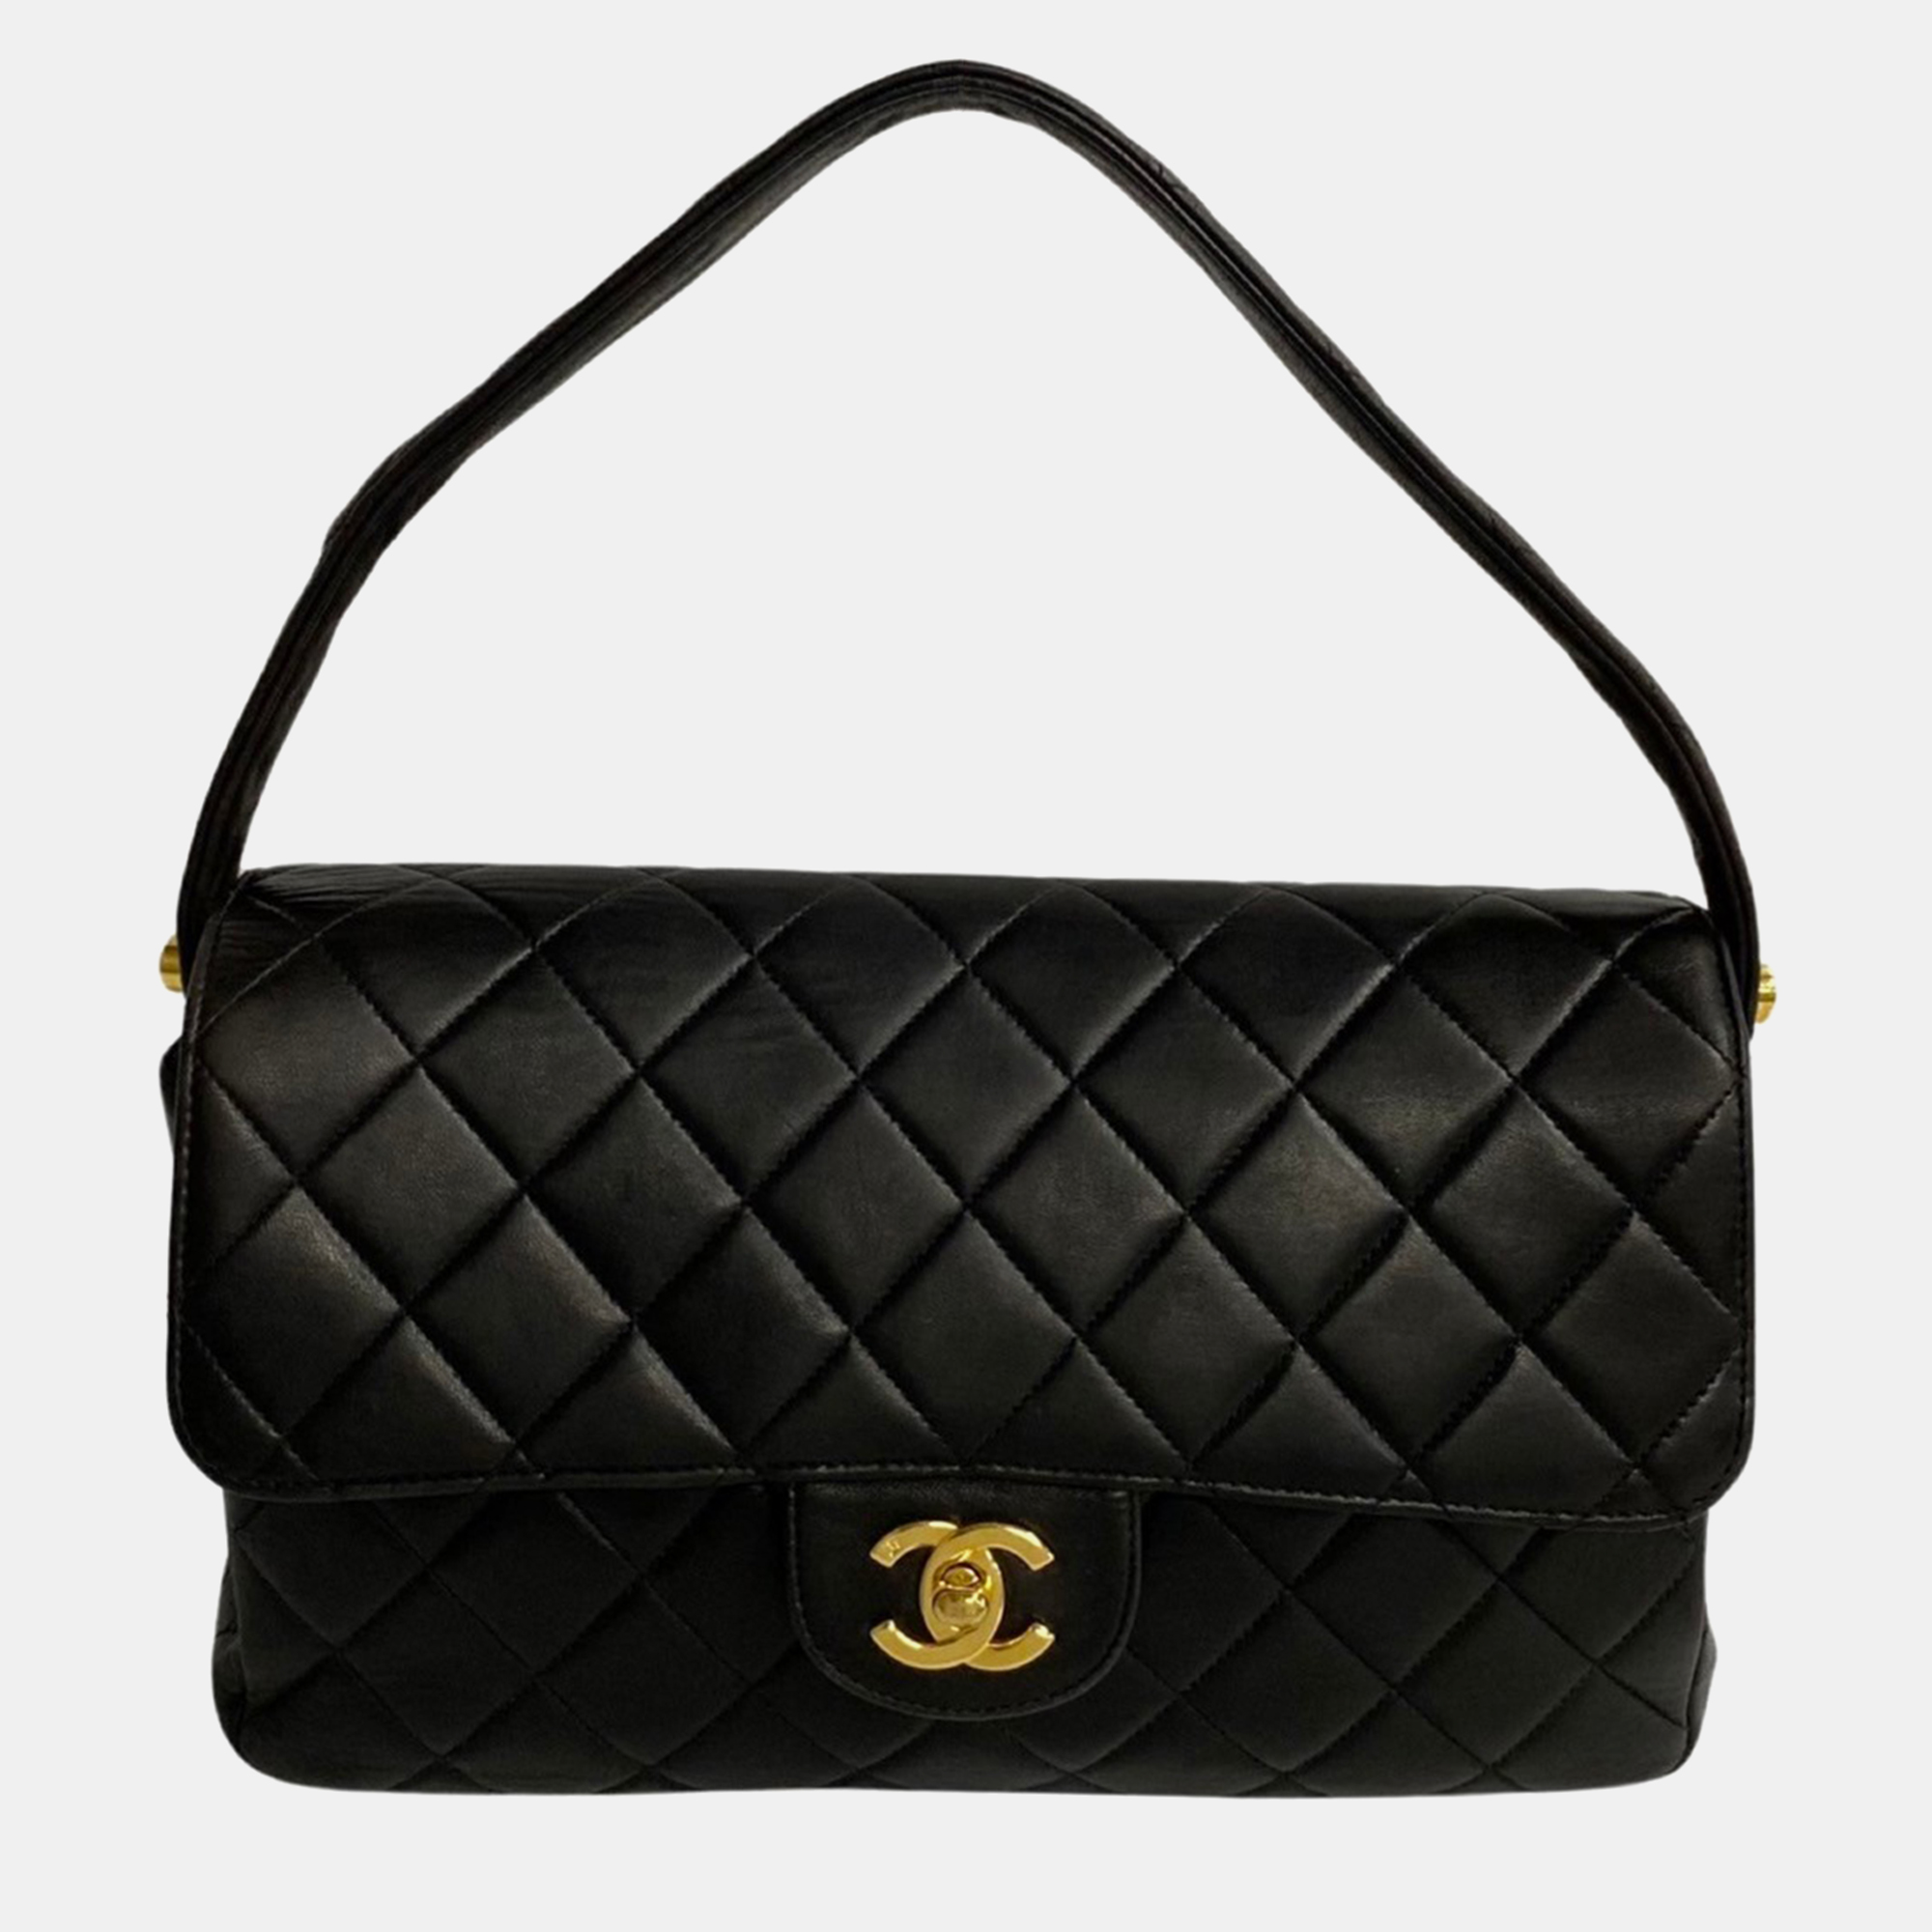 Pre-owned Chanel Black Leather Quilted Double Sided Flap Bag